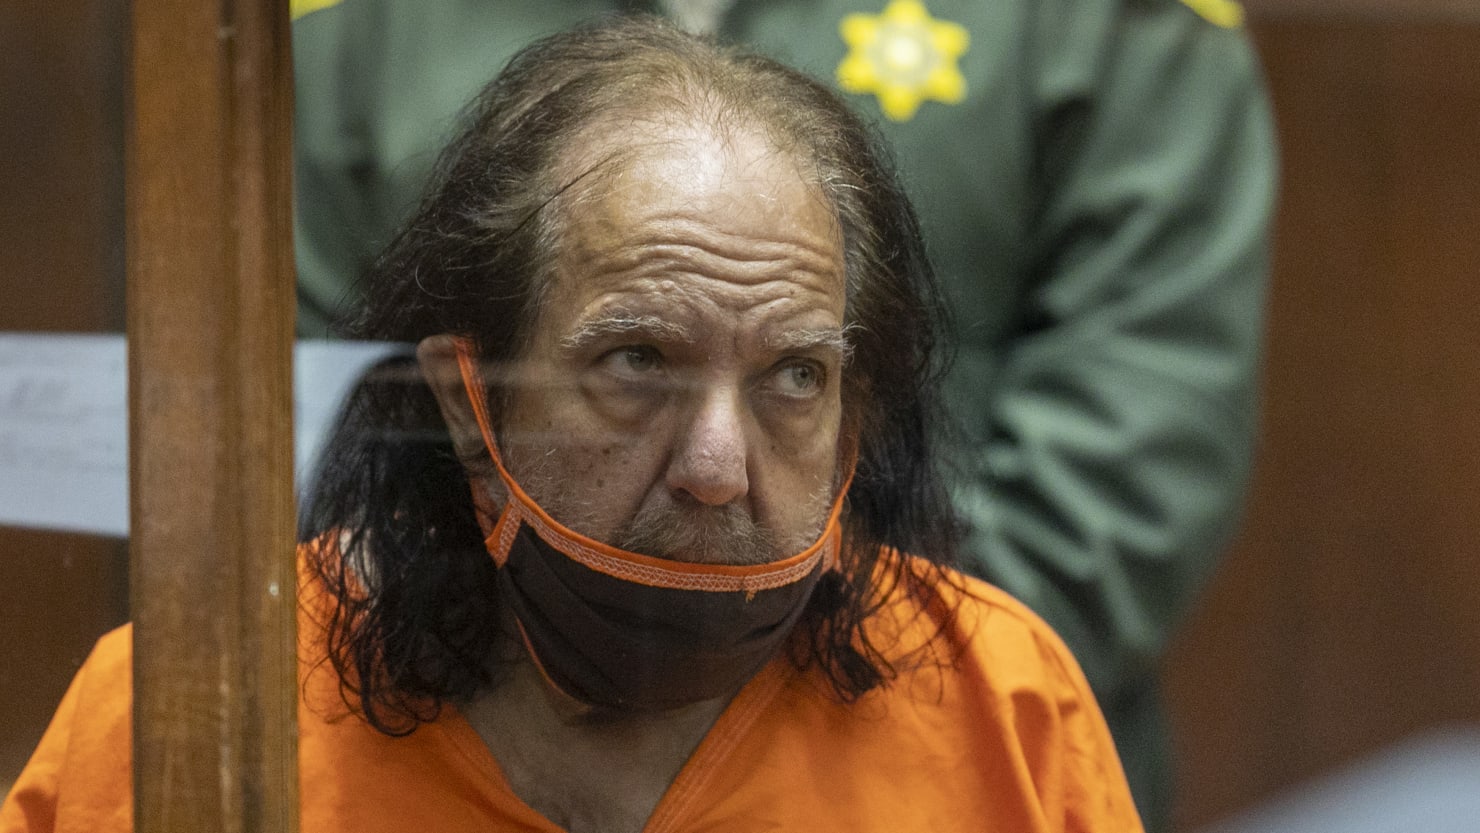 Xxx Korean Father In Law Rapes - Ron Jeremy's Rape Trial to be Scrapped Over 'Severe Dementia'